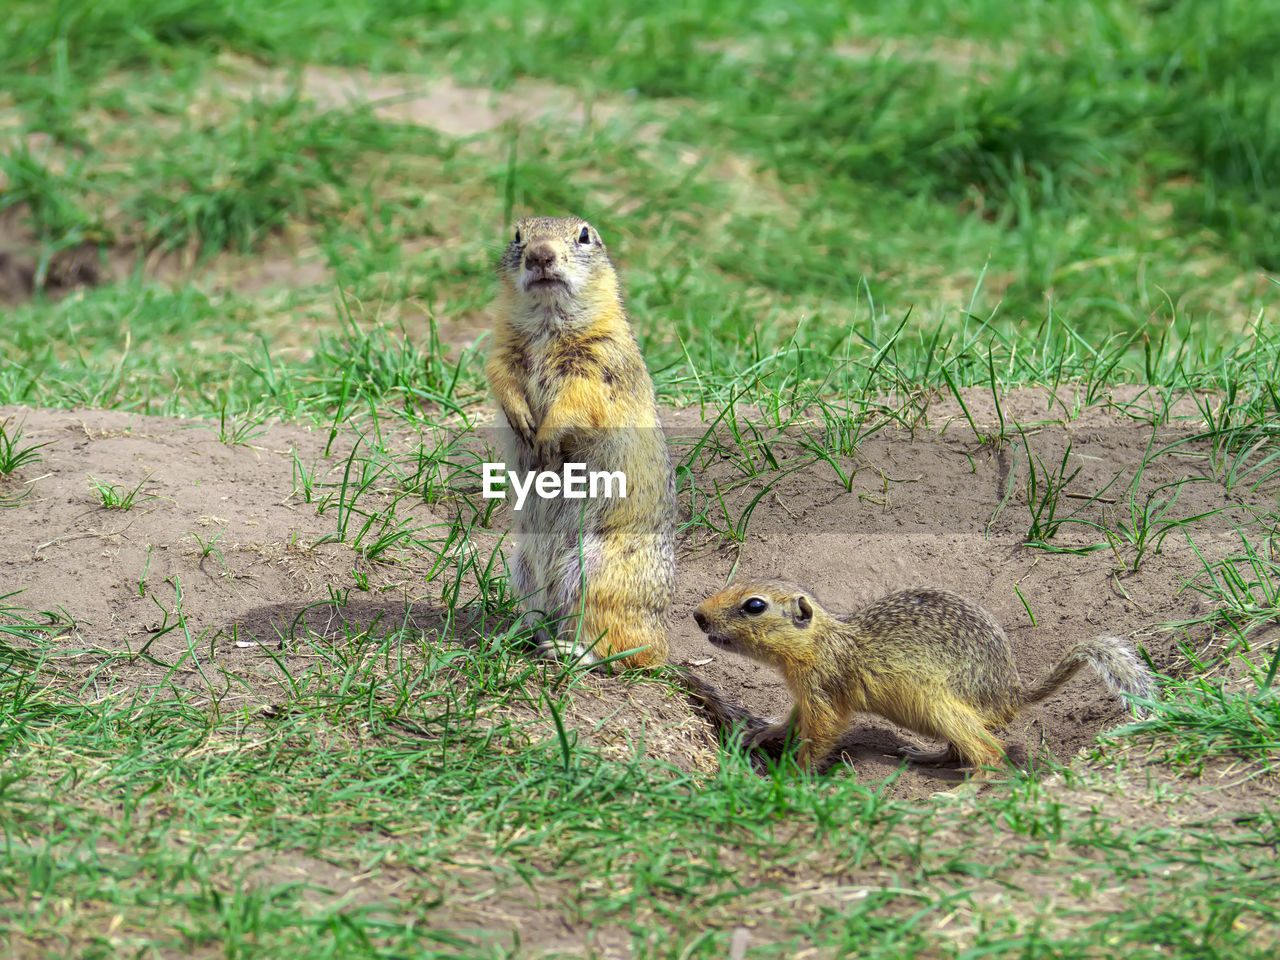 animal themes, animal, animal wildlife, wildlife, squirrel, mammal, grass, rodent, nature, no people, group of animals, plant, chipmunk, prairie dog, two animals, land, field, outdoors, day, green